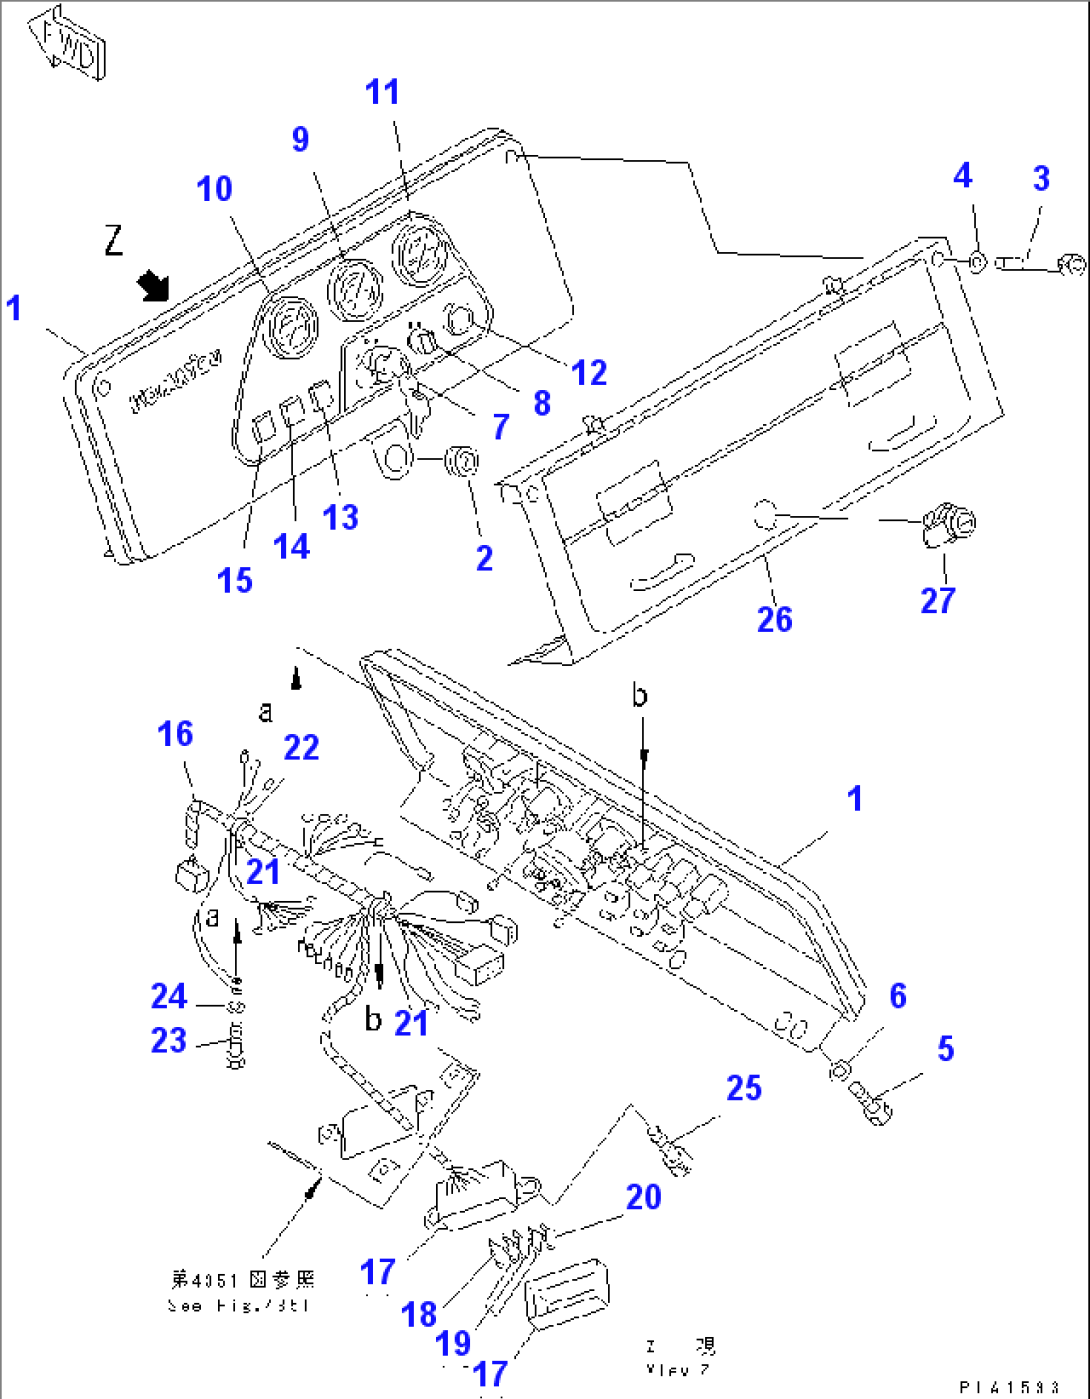 INSTRUMENT PANEL (FOR MONO LEVER STEERING) (WITH VANDALISM PROTECTION)